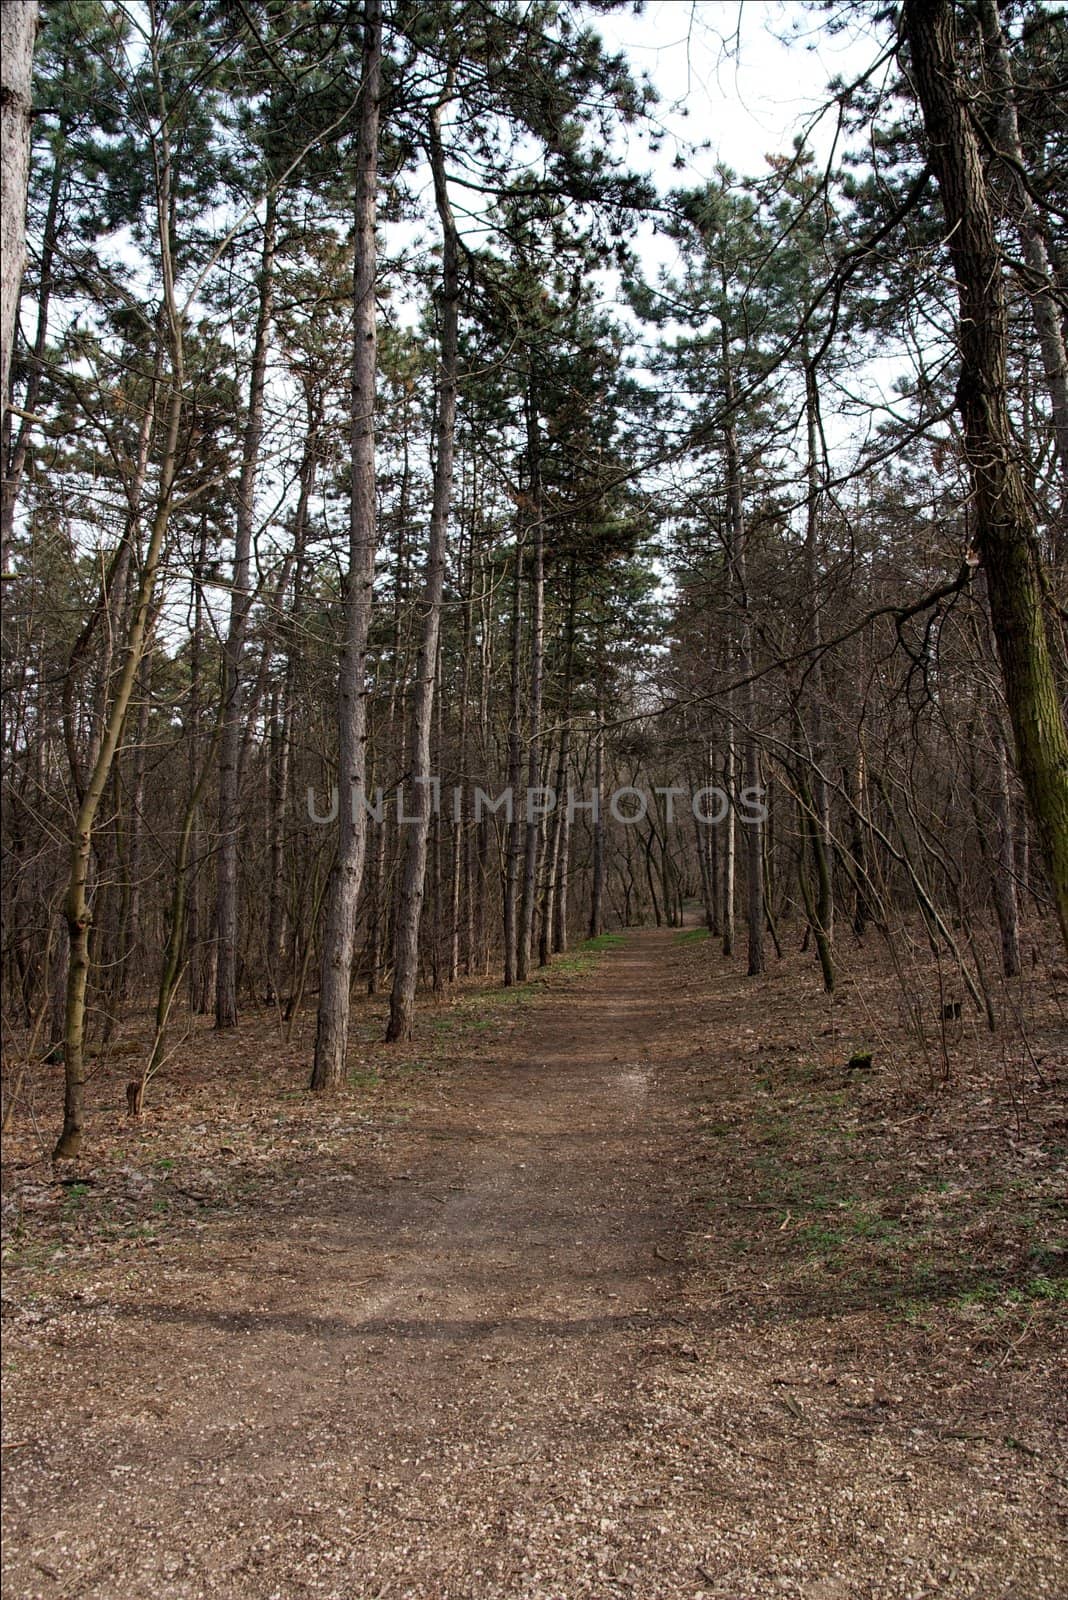 Small path in a forest of pine trees